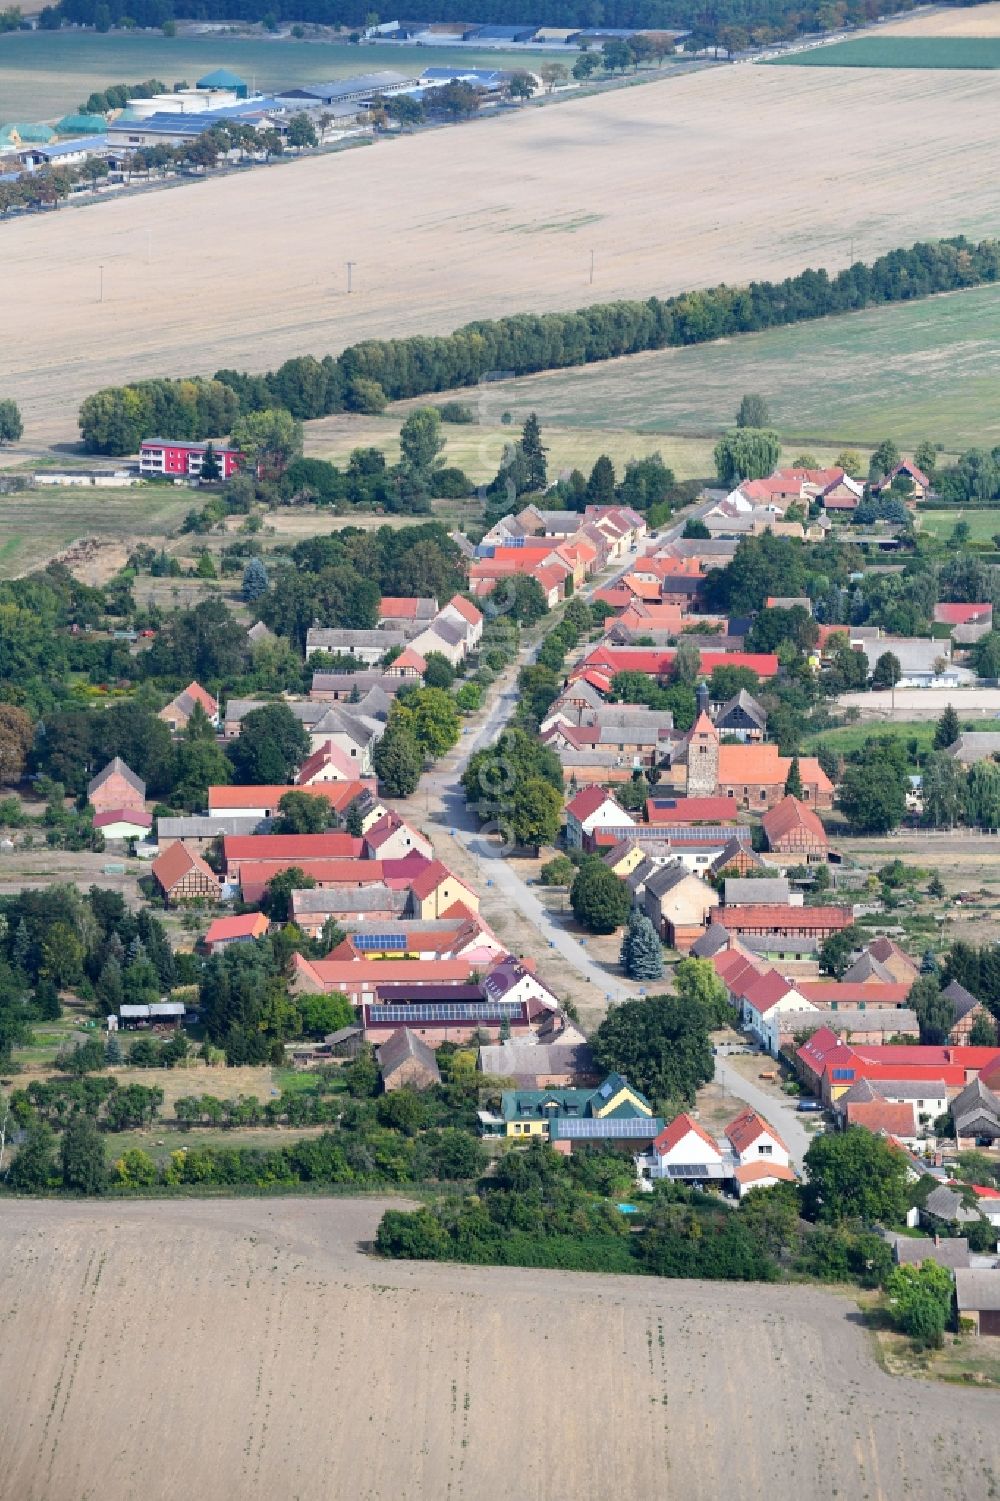 Bardenitz Pechüle from above - Village - view on the edge of agricultural fields and farmland in Bardenitz Pechuele in the state Brandenburg, Germany